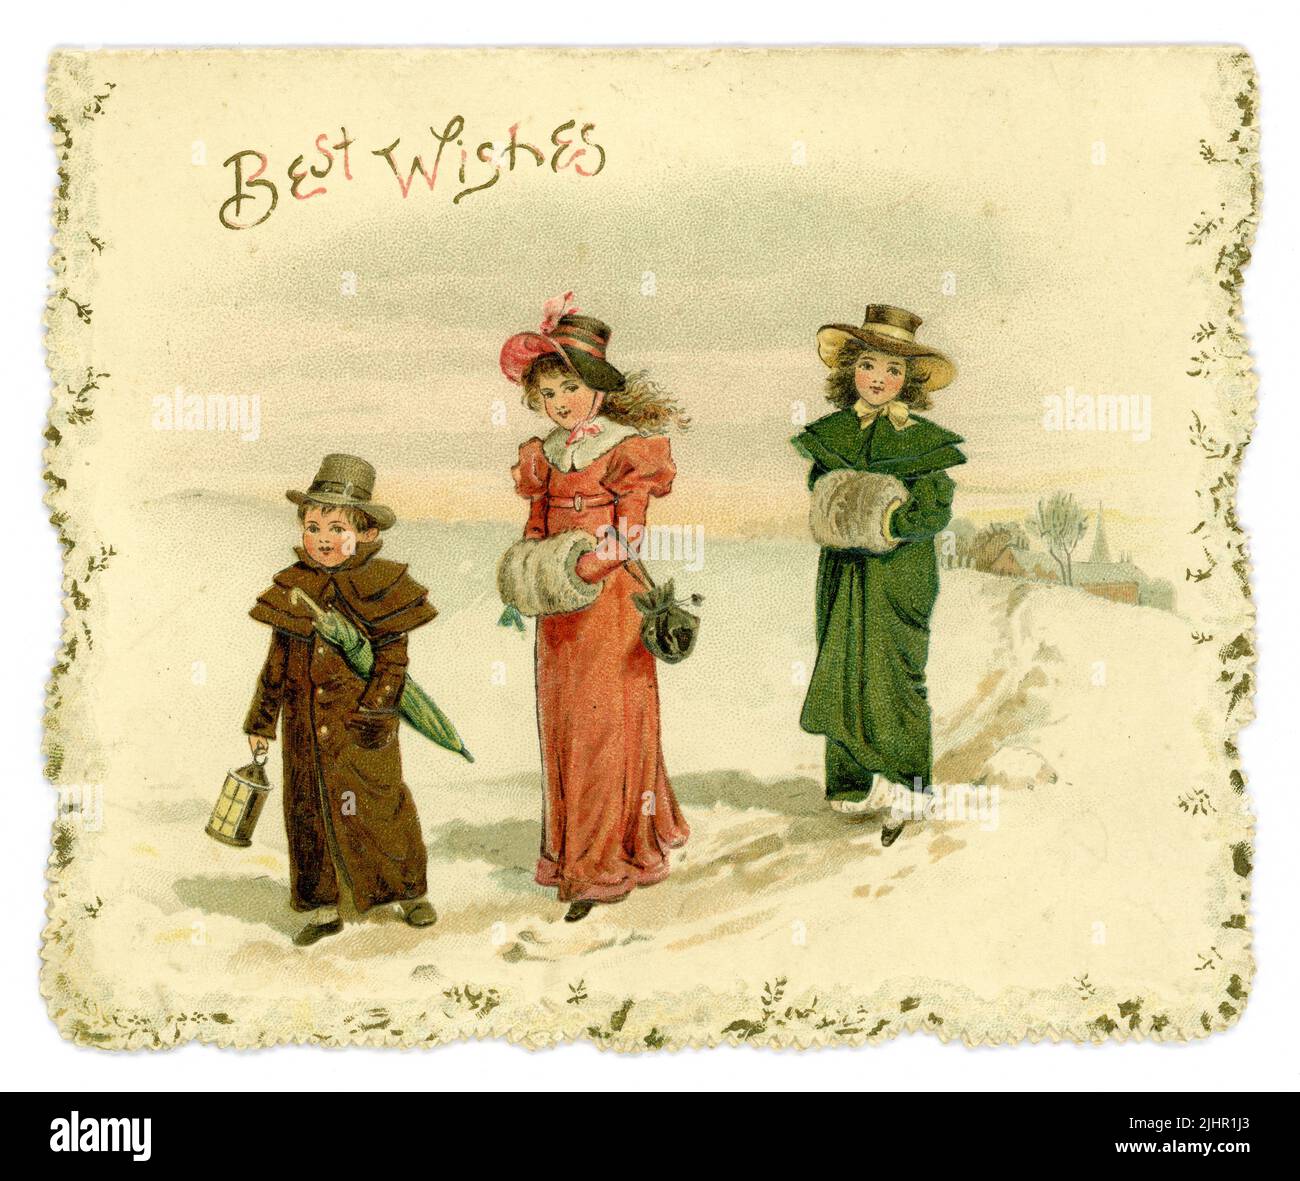 Original Edwardian era Christmas Greetings card, 'bets wishes' - children in Regency period style (Regency was 1811-1820) clothes walking in the snow, similar online postcard sent in US. dated 1904 Stock Photo